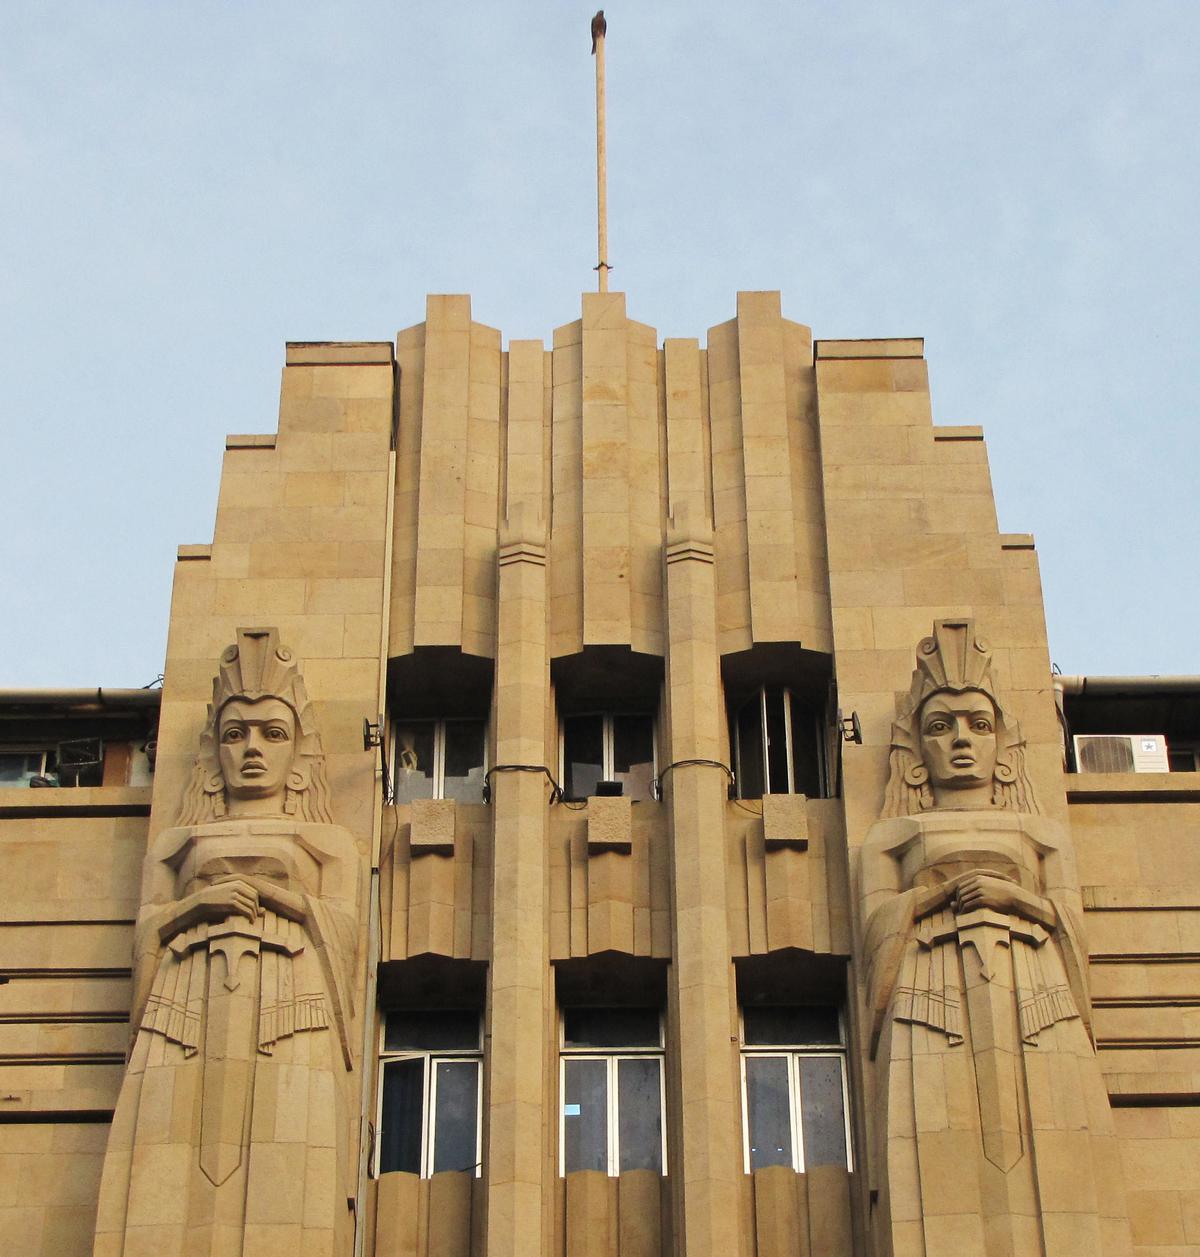 The New India Assurance Building is an Art Deco office building built in the 1930s.